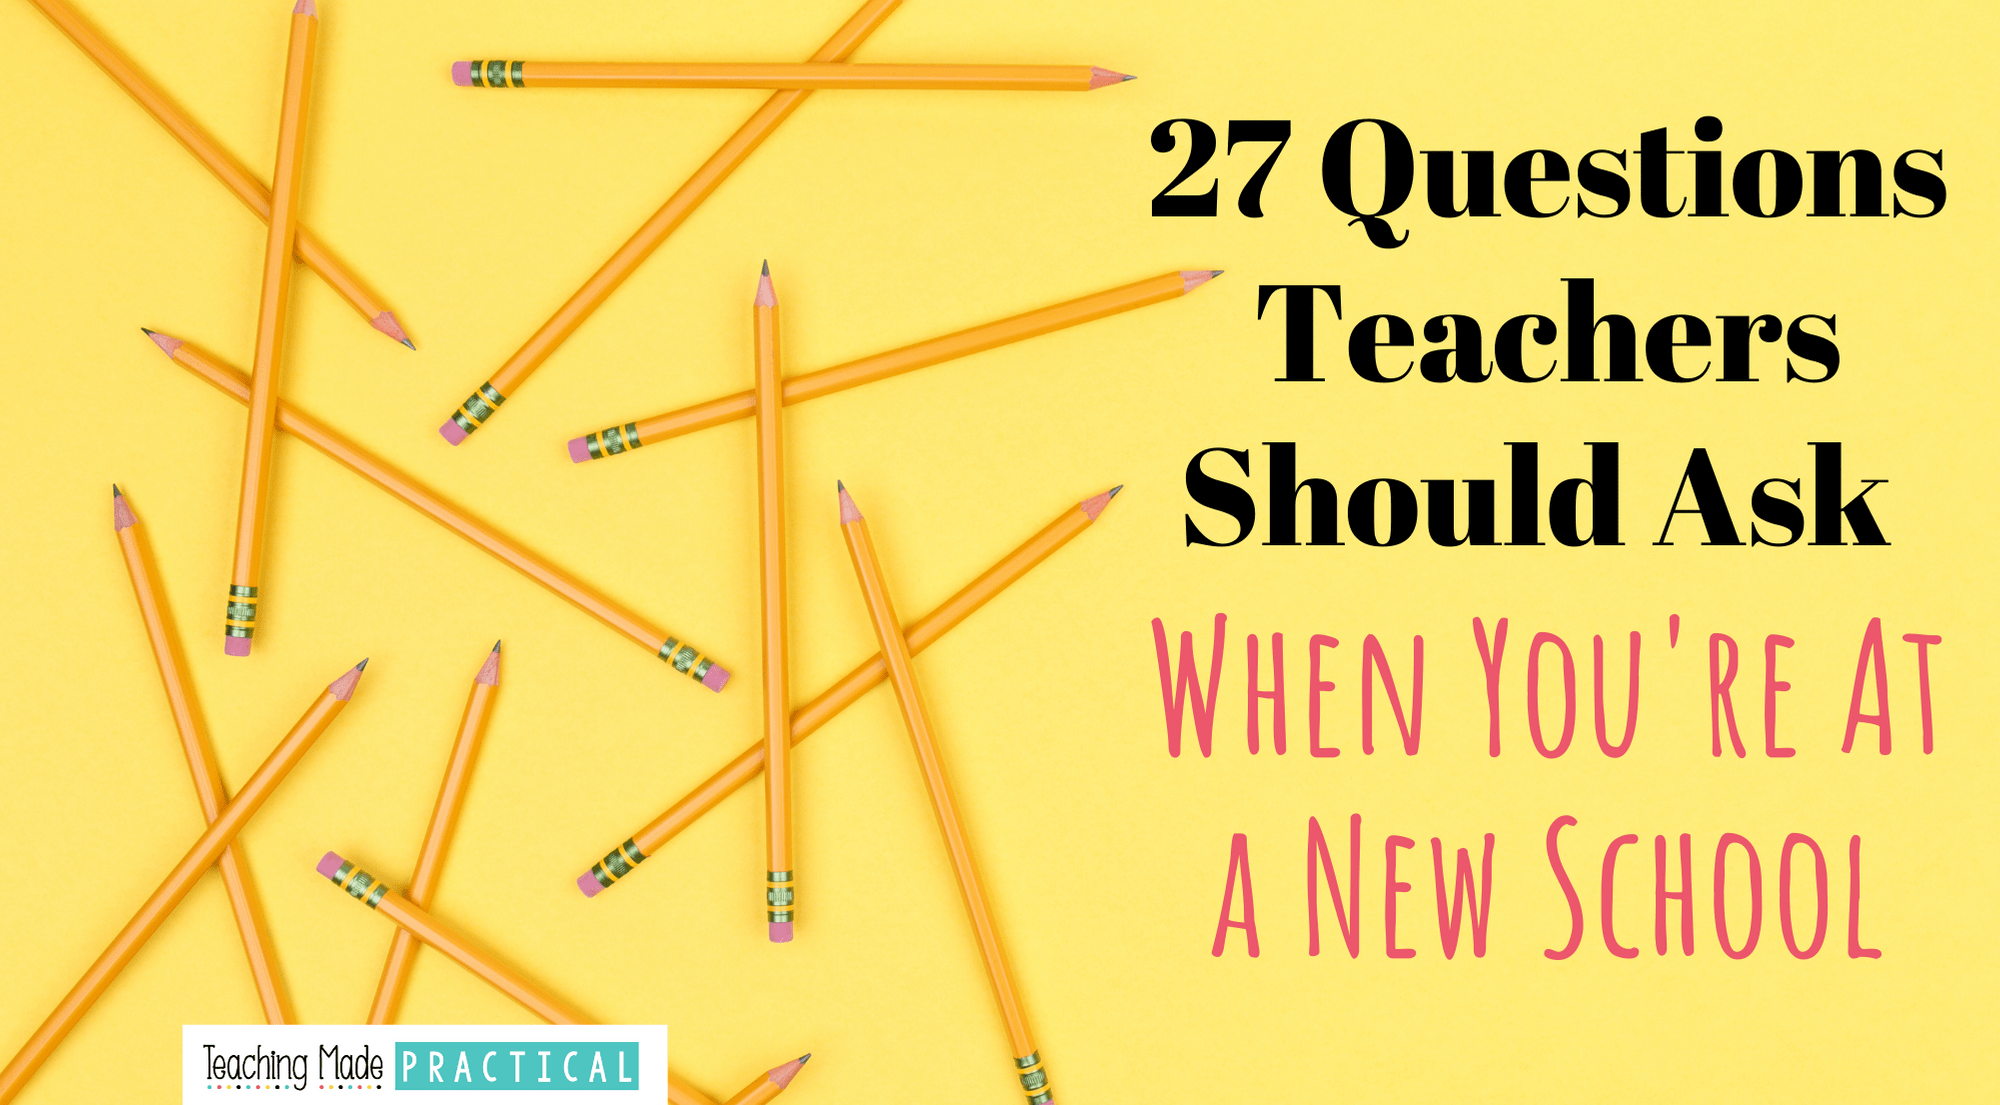 Questions to ask about unwritten rules when you are moving schools as a teacher - or for first year teachers that are at a school for the first time